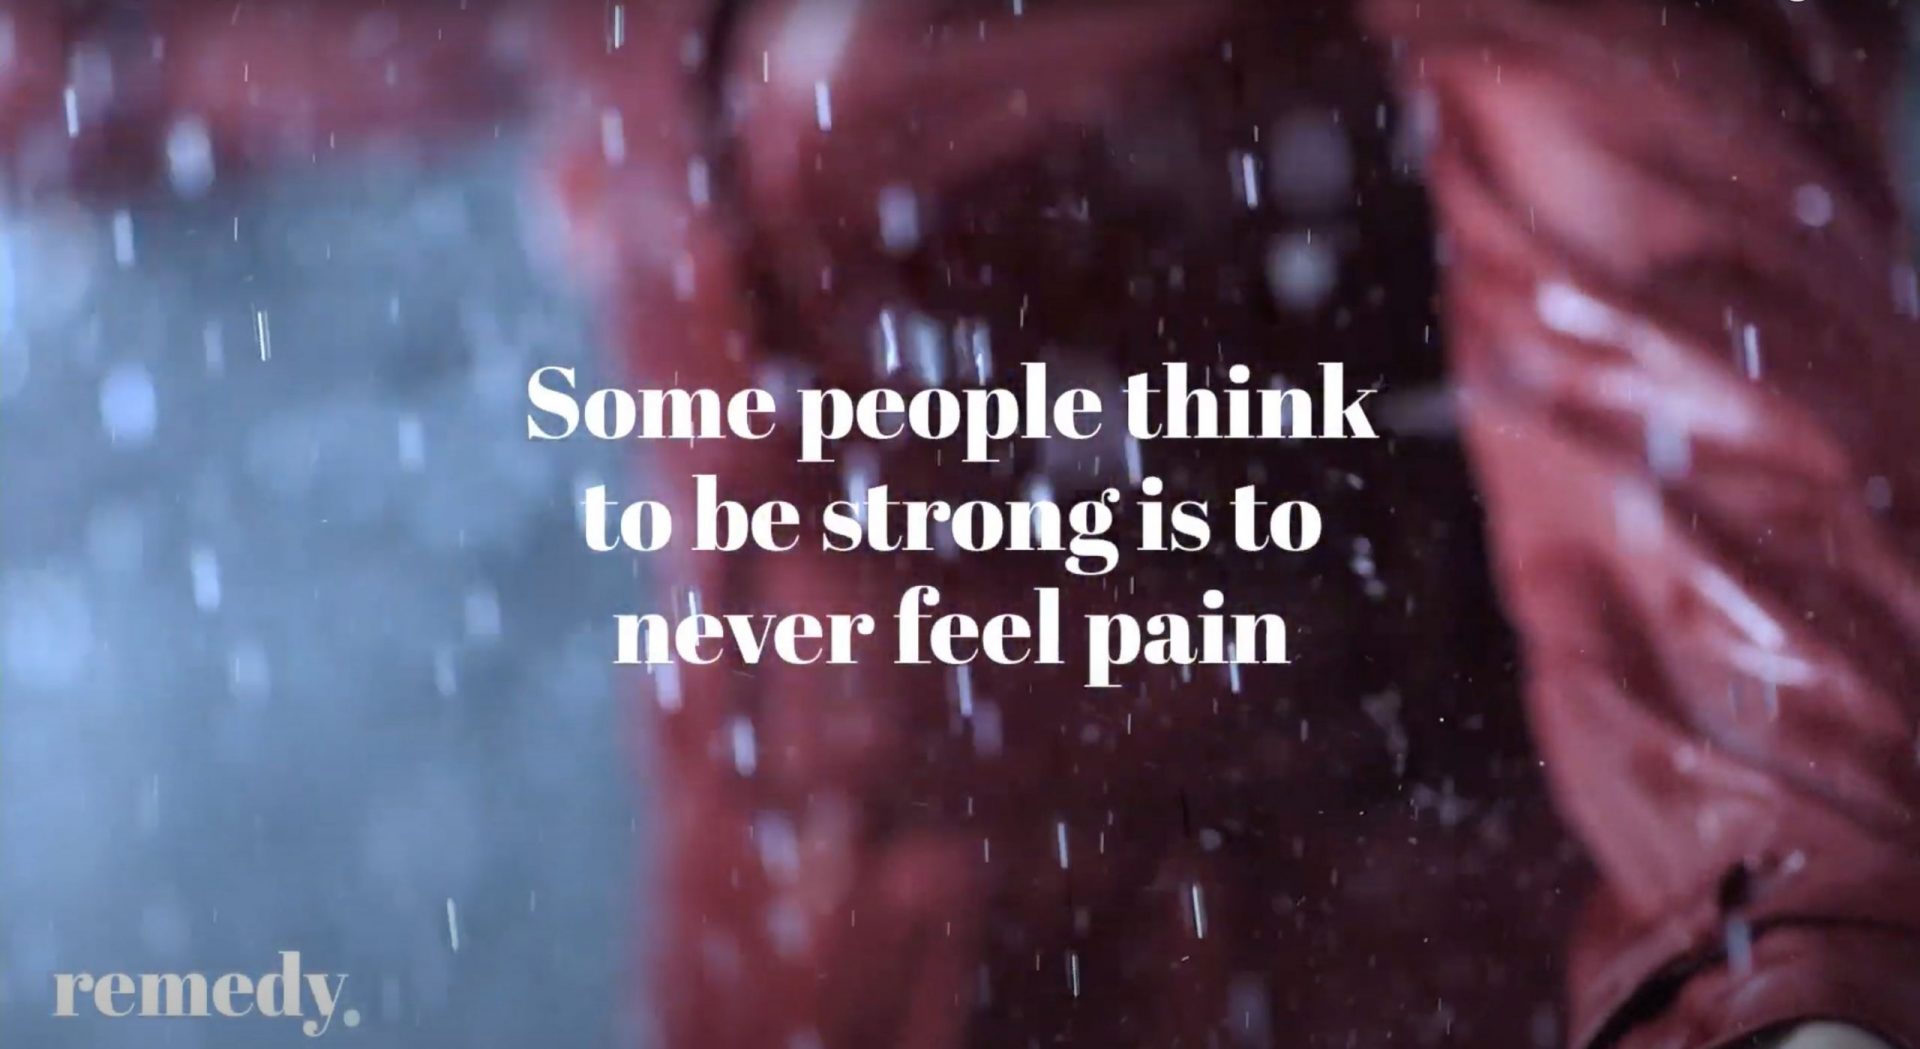 Some people think to be strong is to never feel pain - Video Cover